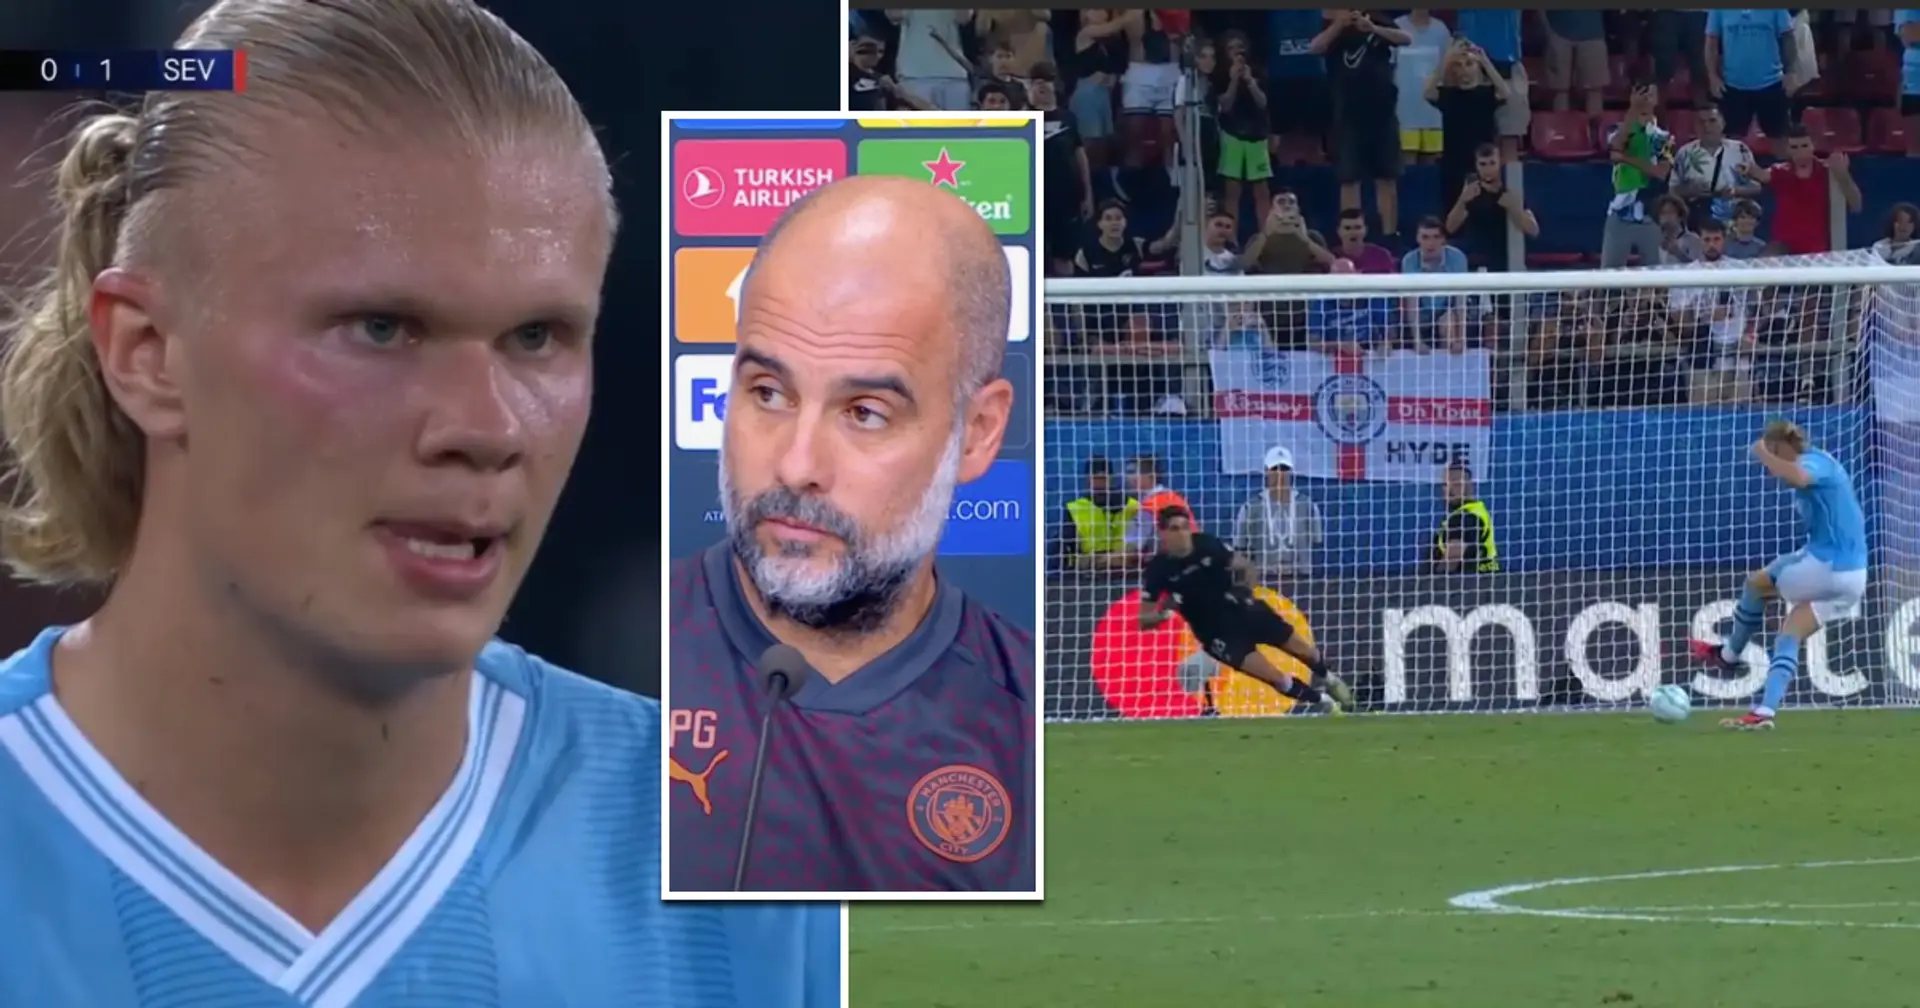 'Does Haaland outscore Mbeumo without De Bruyne?': Global fans react as Haaland 'ghosts' in another final